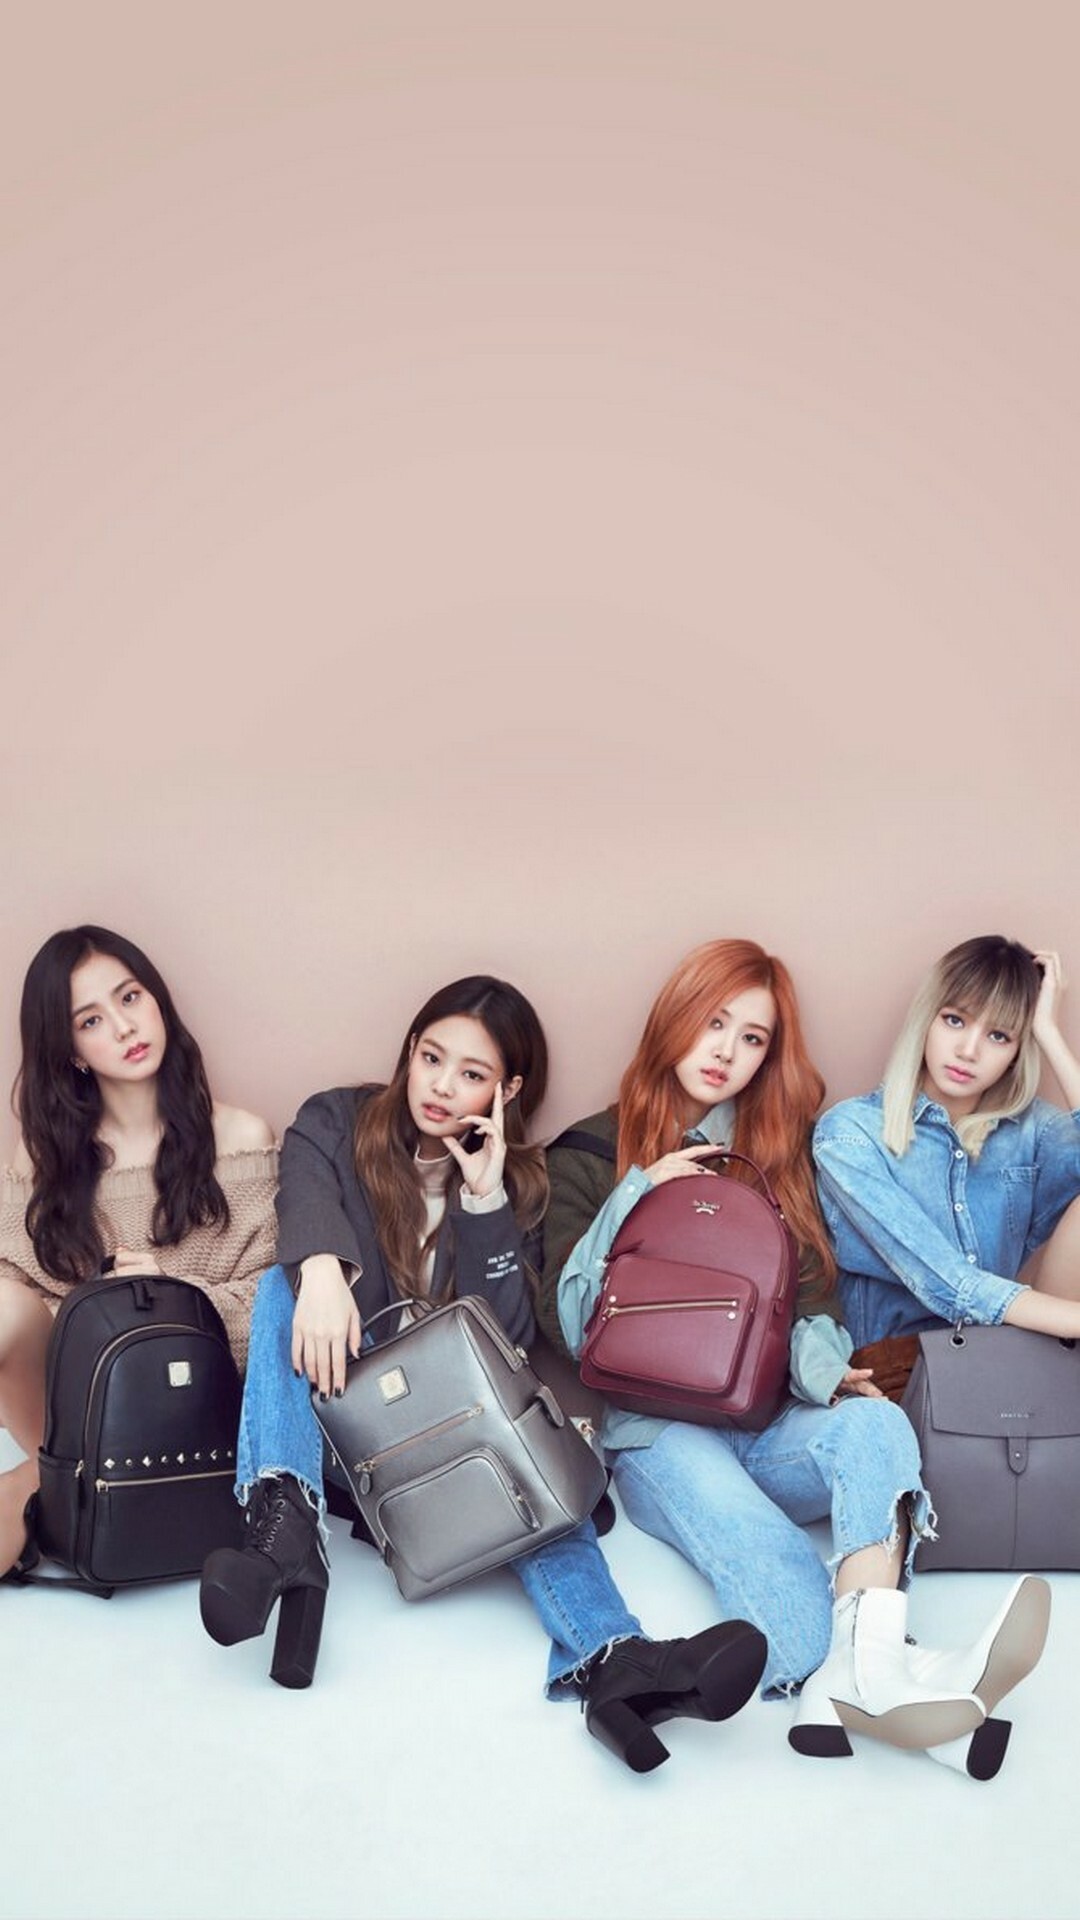 BLACKPINK: Time's Entertainer of the Year in 2022, K-pop. 1080x1920 Full HD Wallpaper.